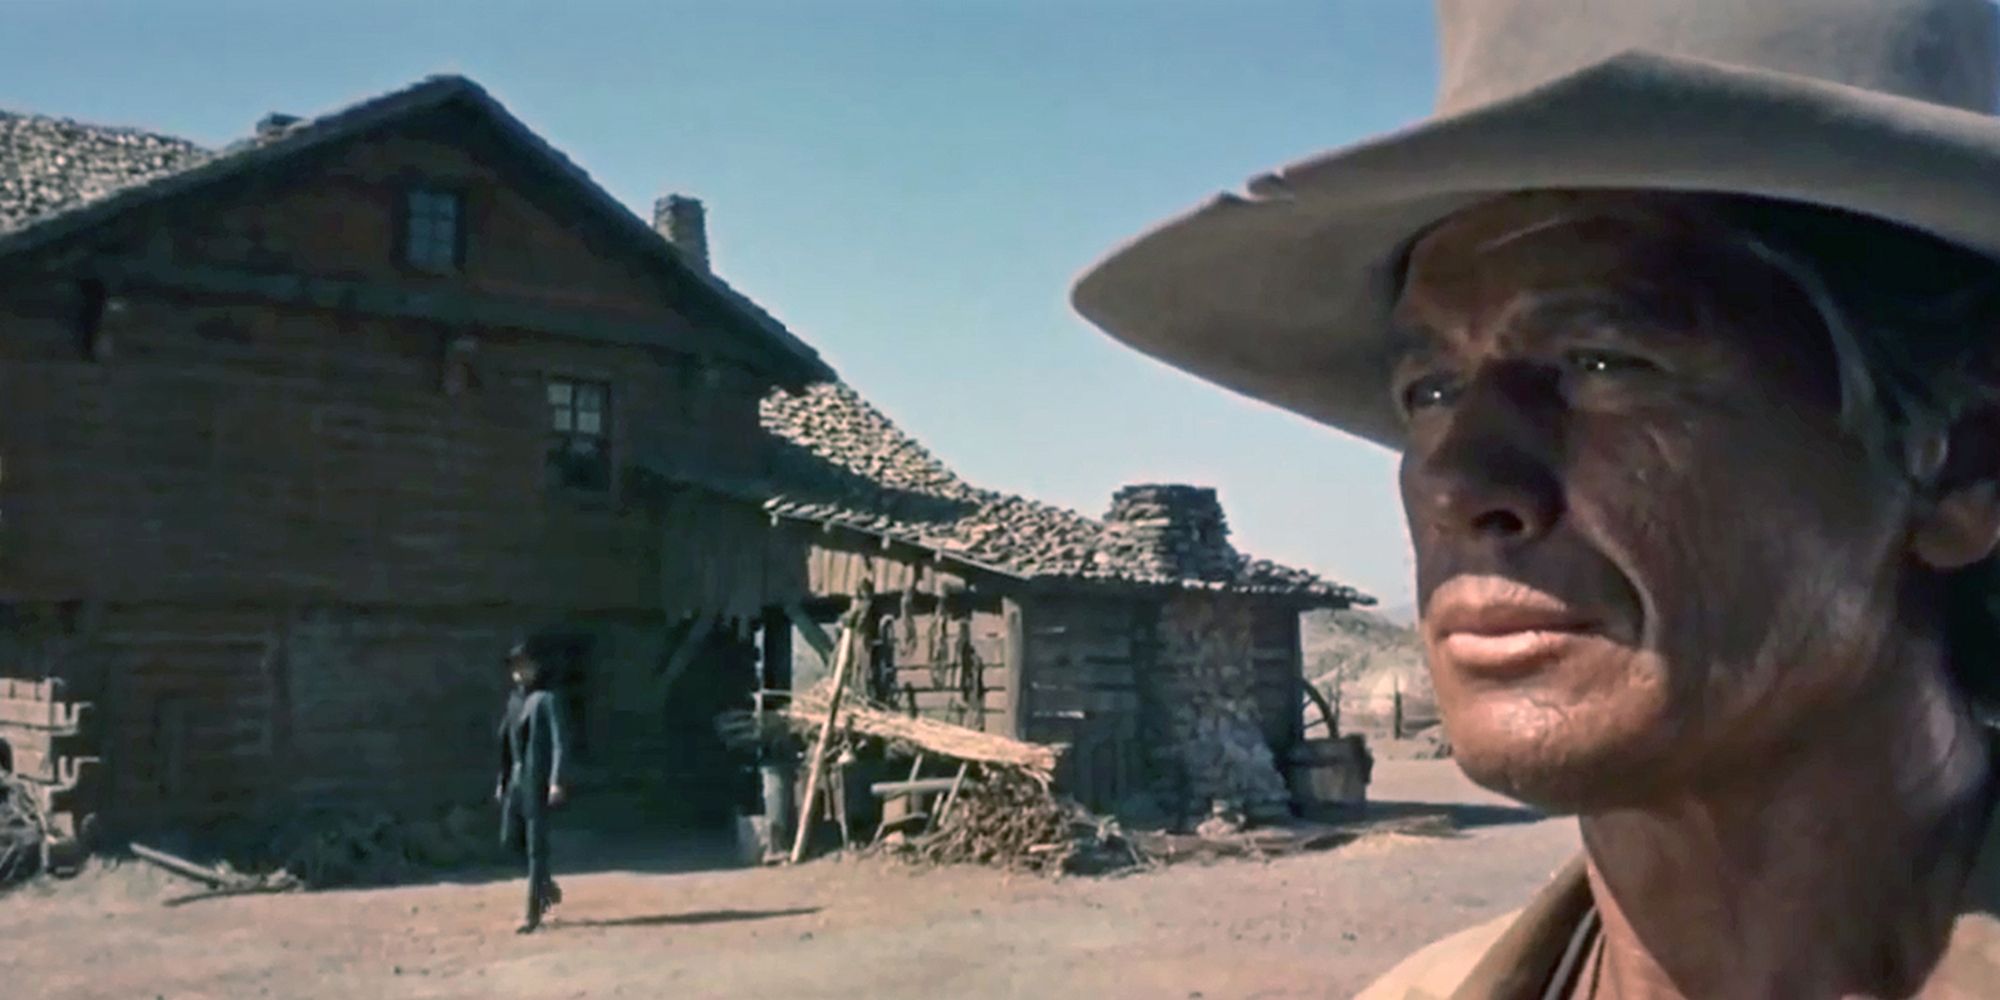 Charles Bronson in 'Once Upon a Time in the West'